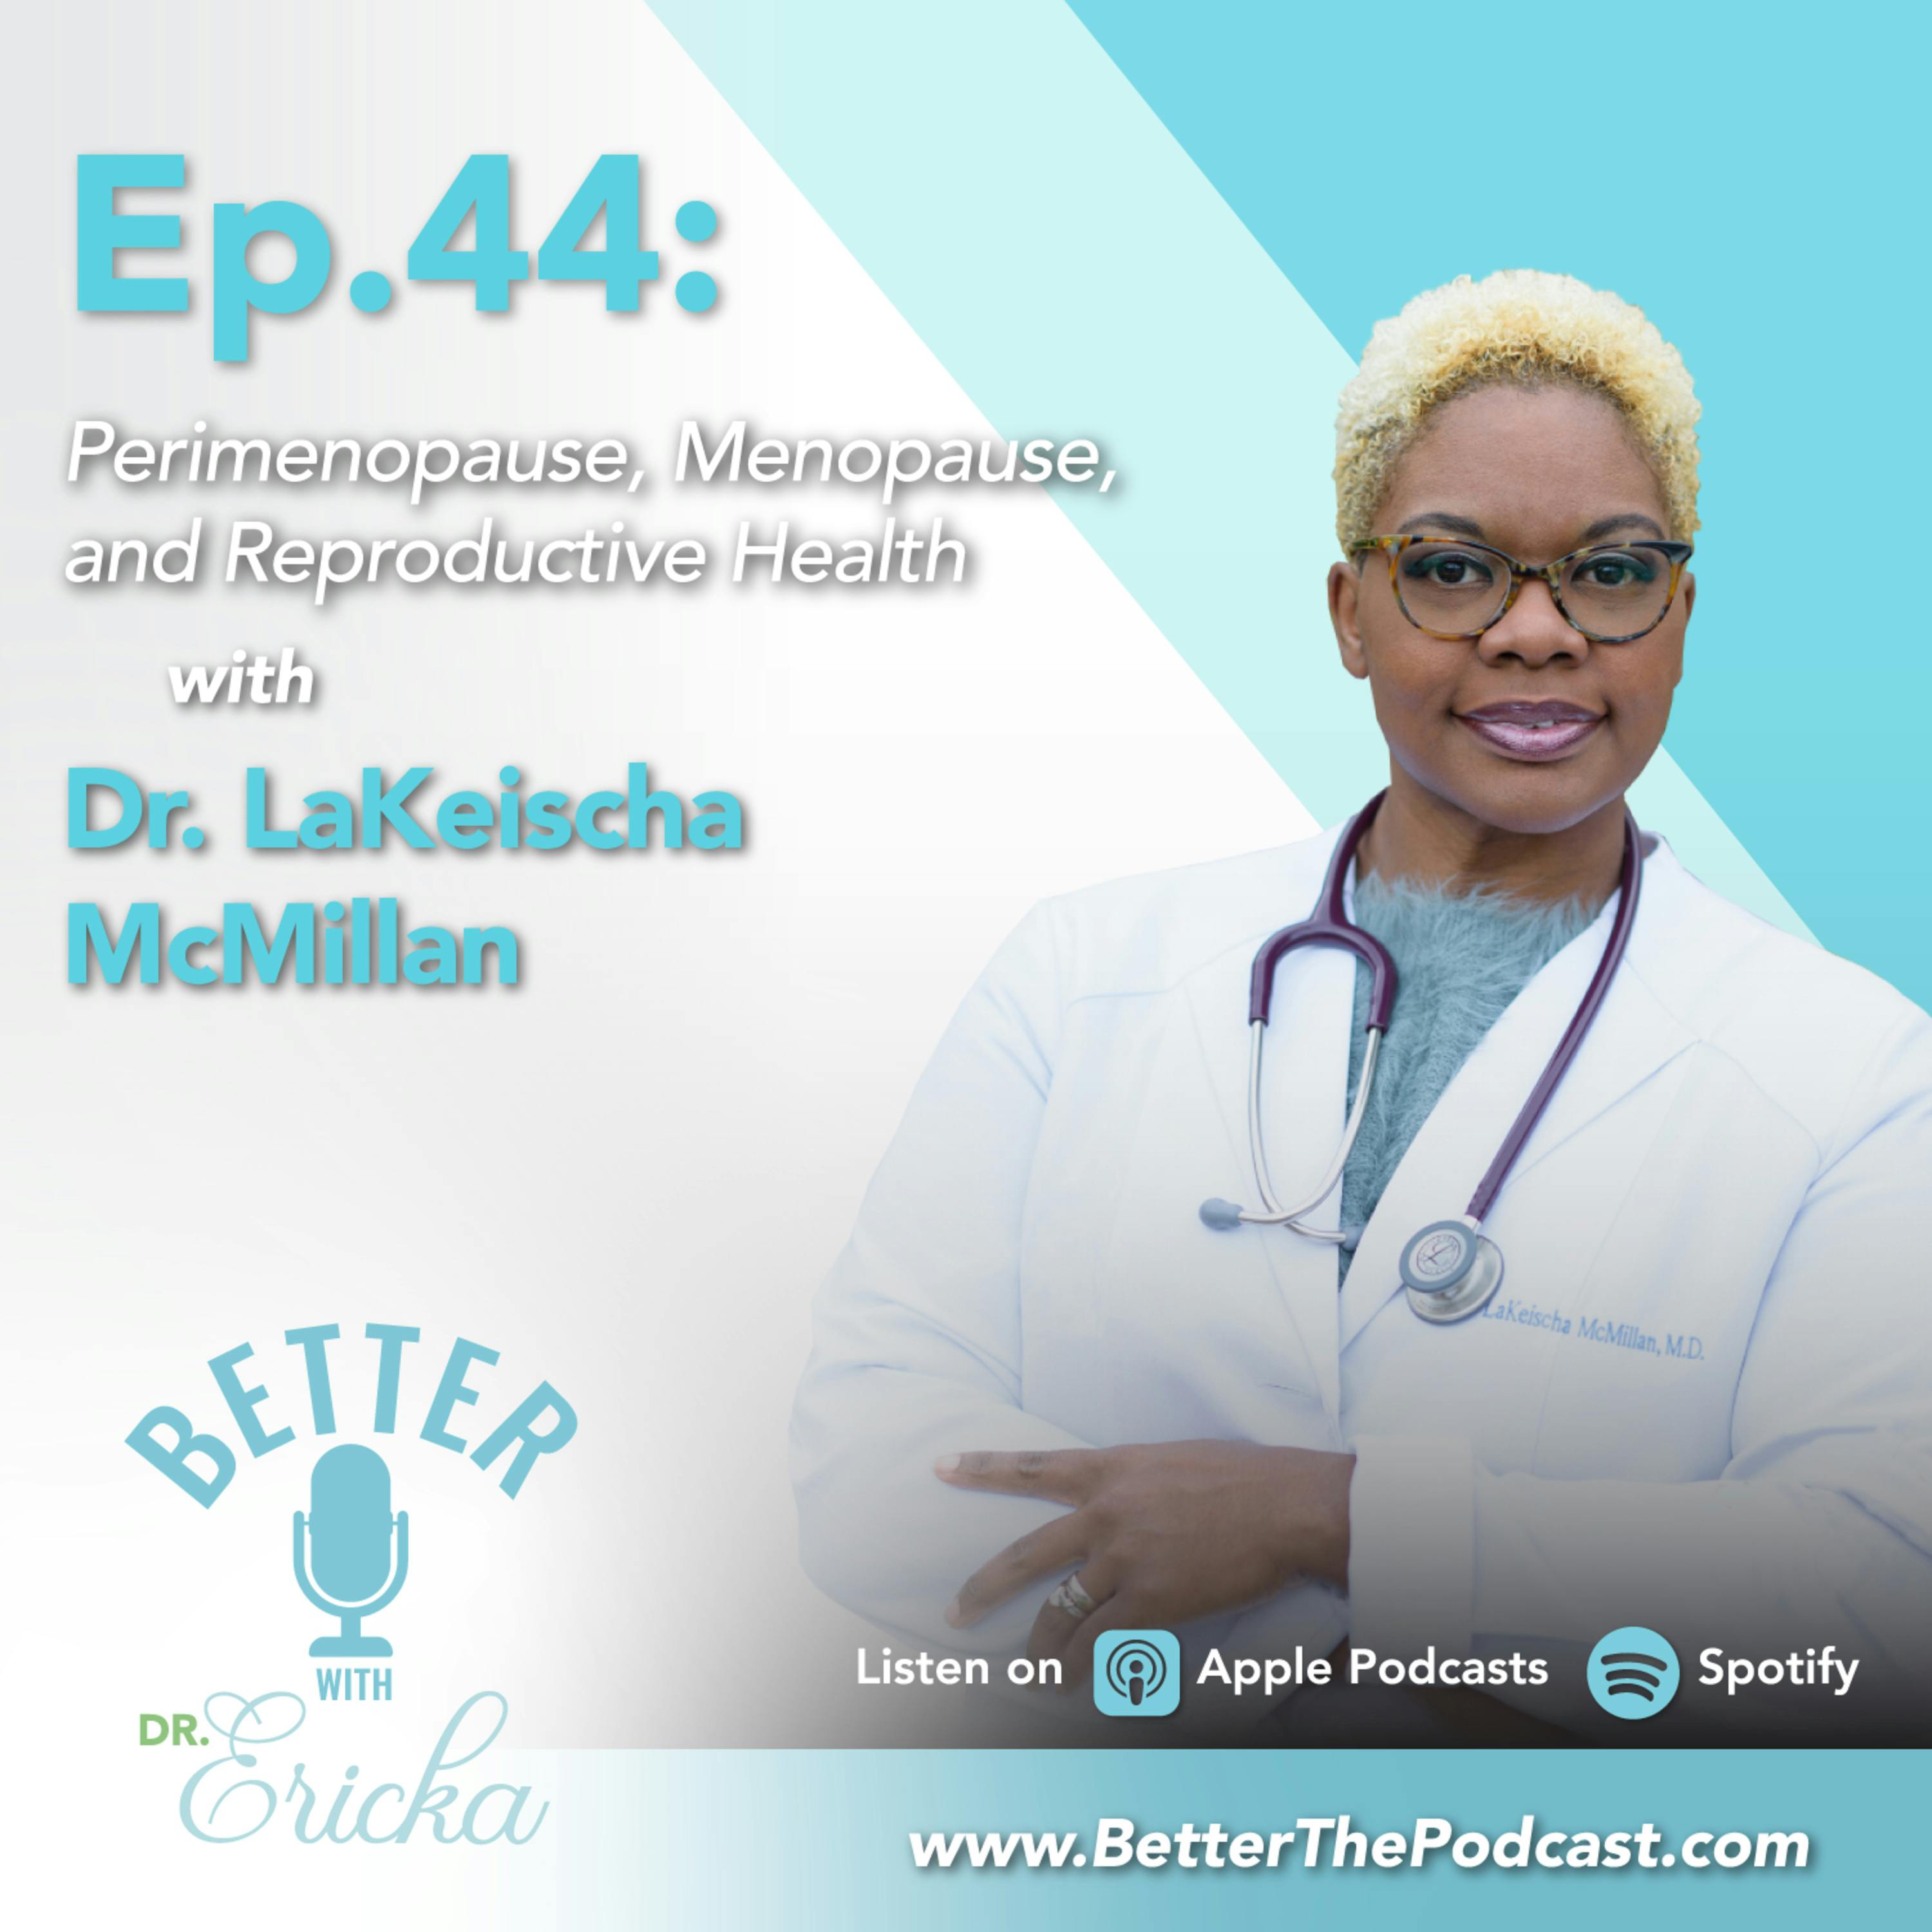 Perimenopause, Menopause, and Reproductive Health with Dr. LaKeischa McMillan